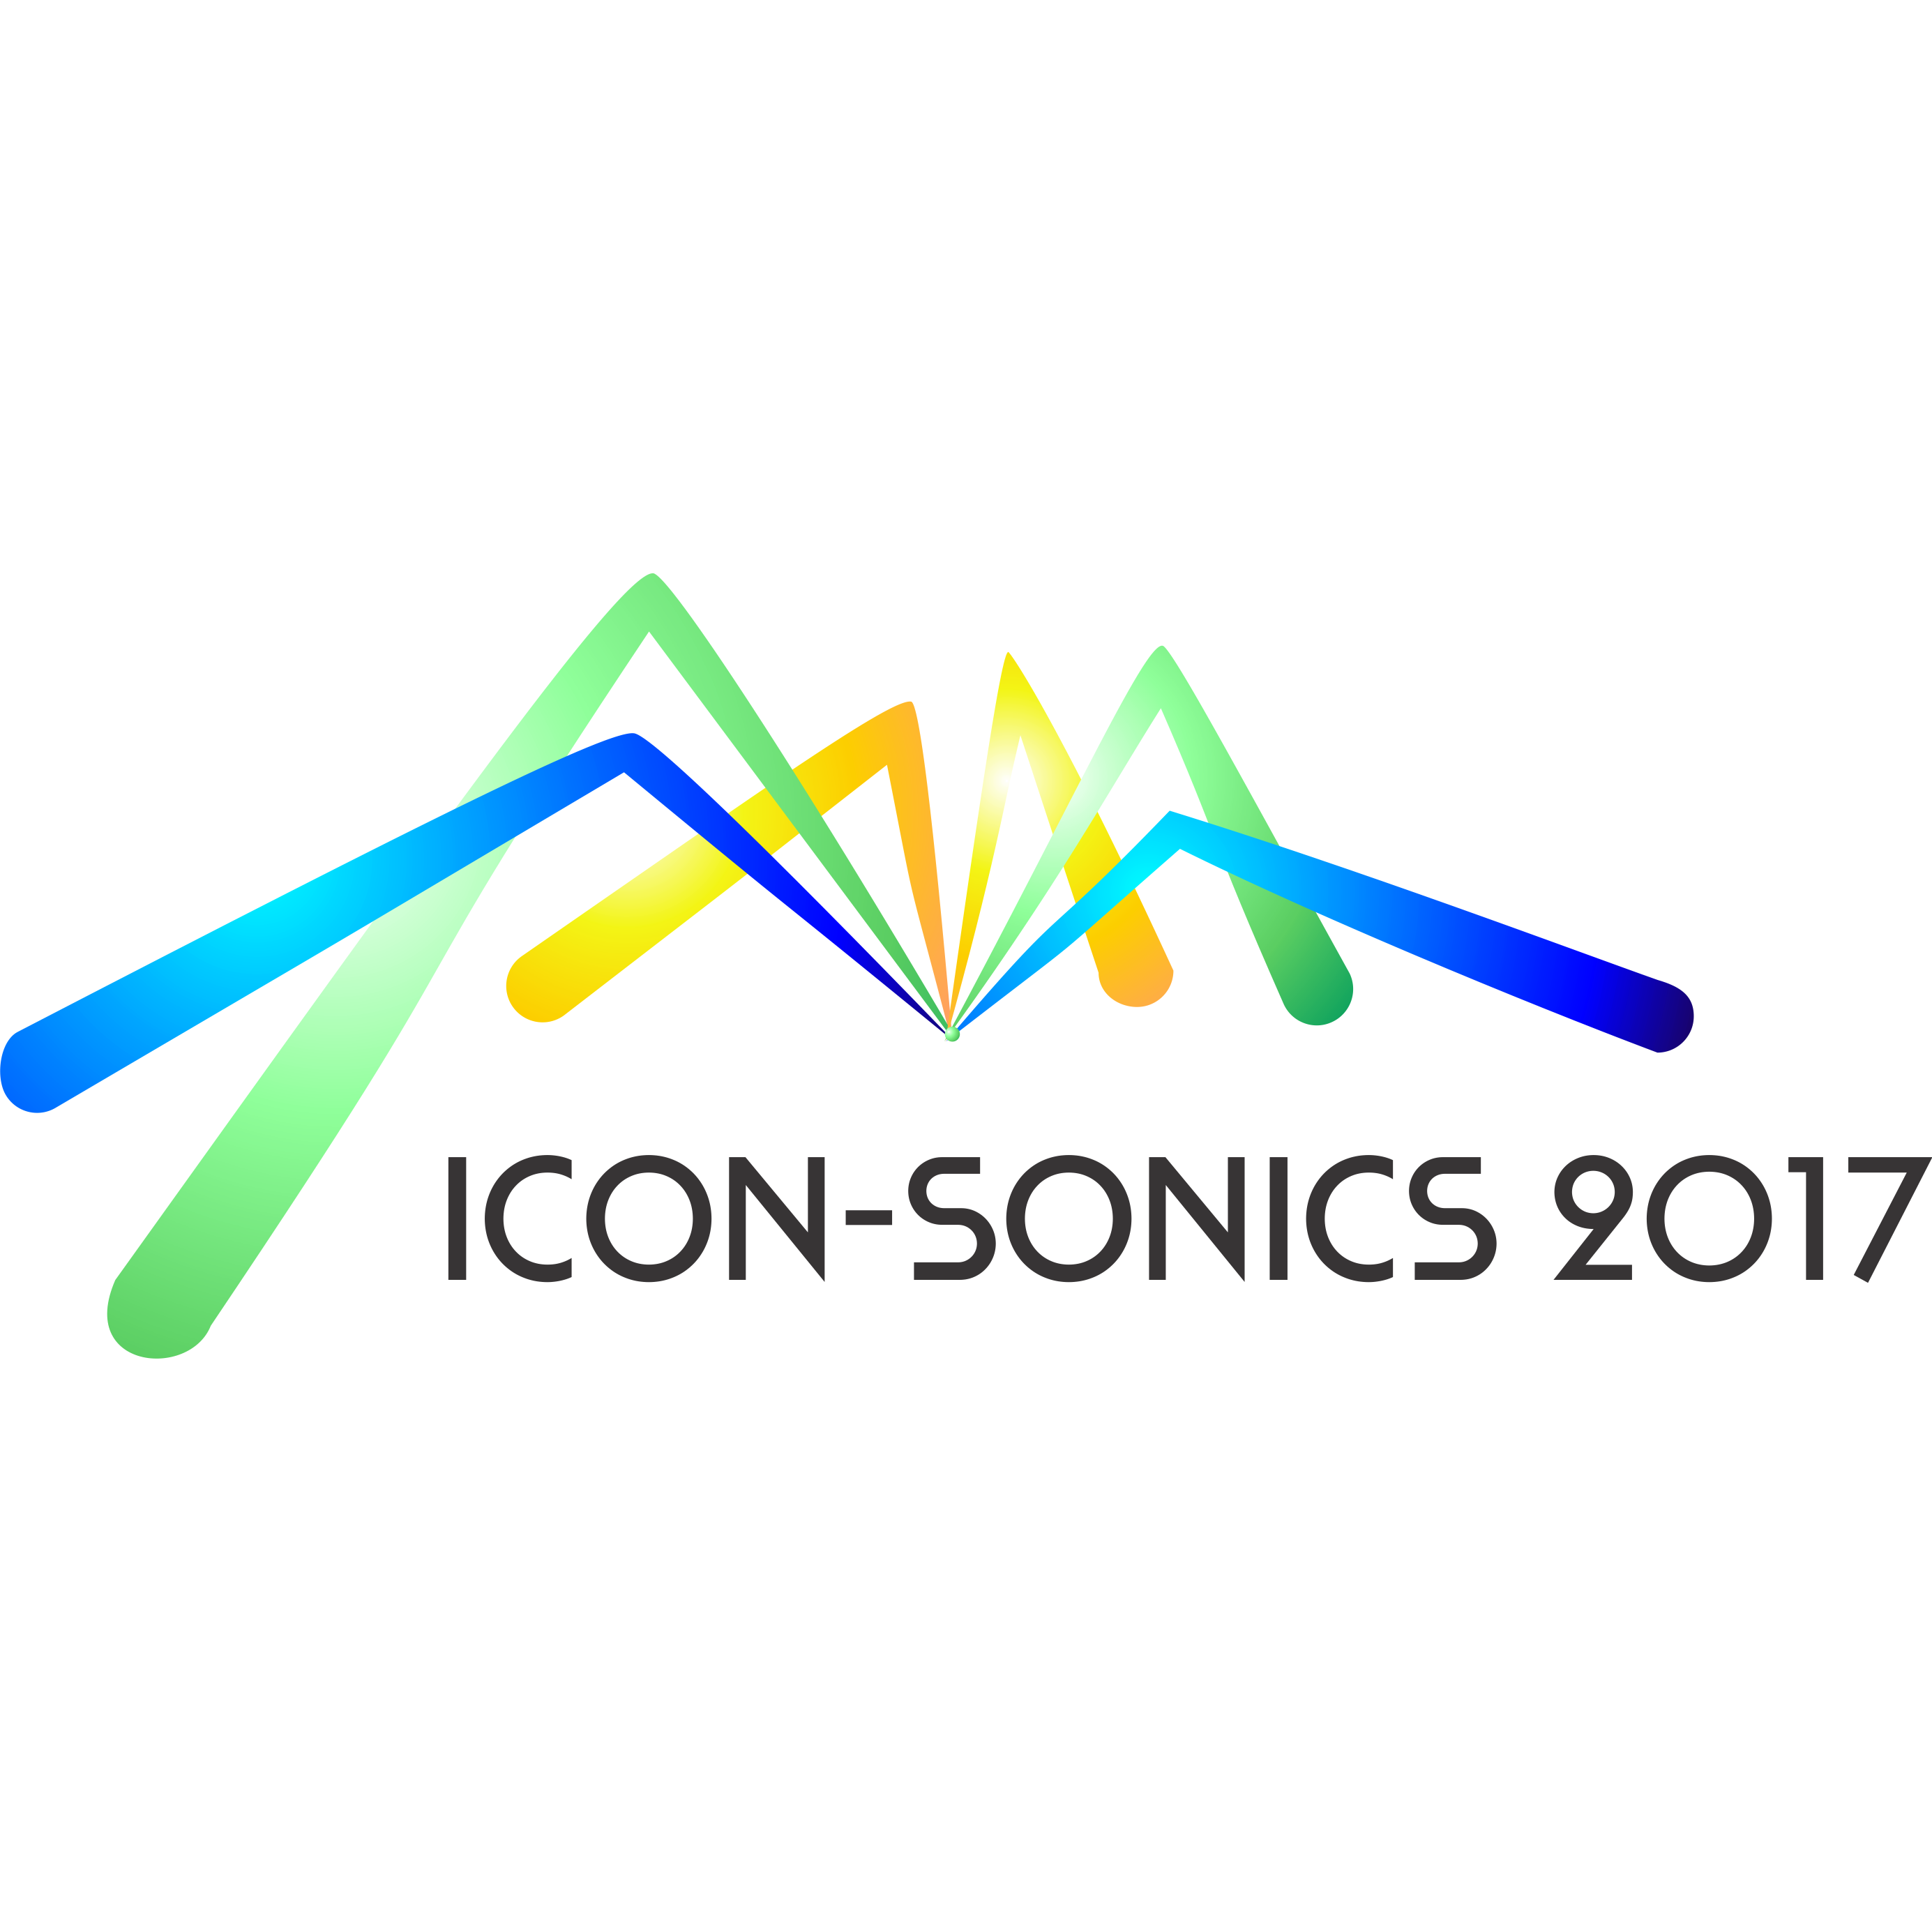 ICON-SONICS focuses on both theory and applications mainly covering the topics of smart cities, automation and Intelligent Computing Systems. All the accepted and presented papers will be submitted to the IEEE Xplore Digital.